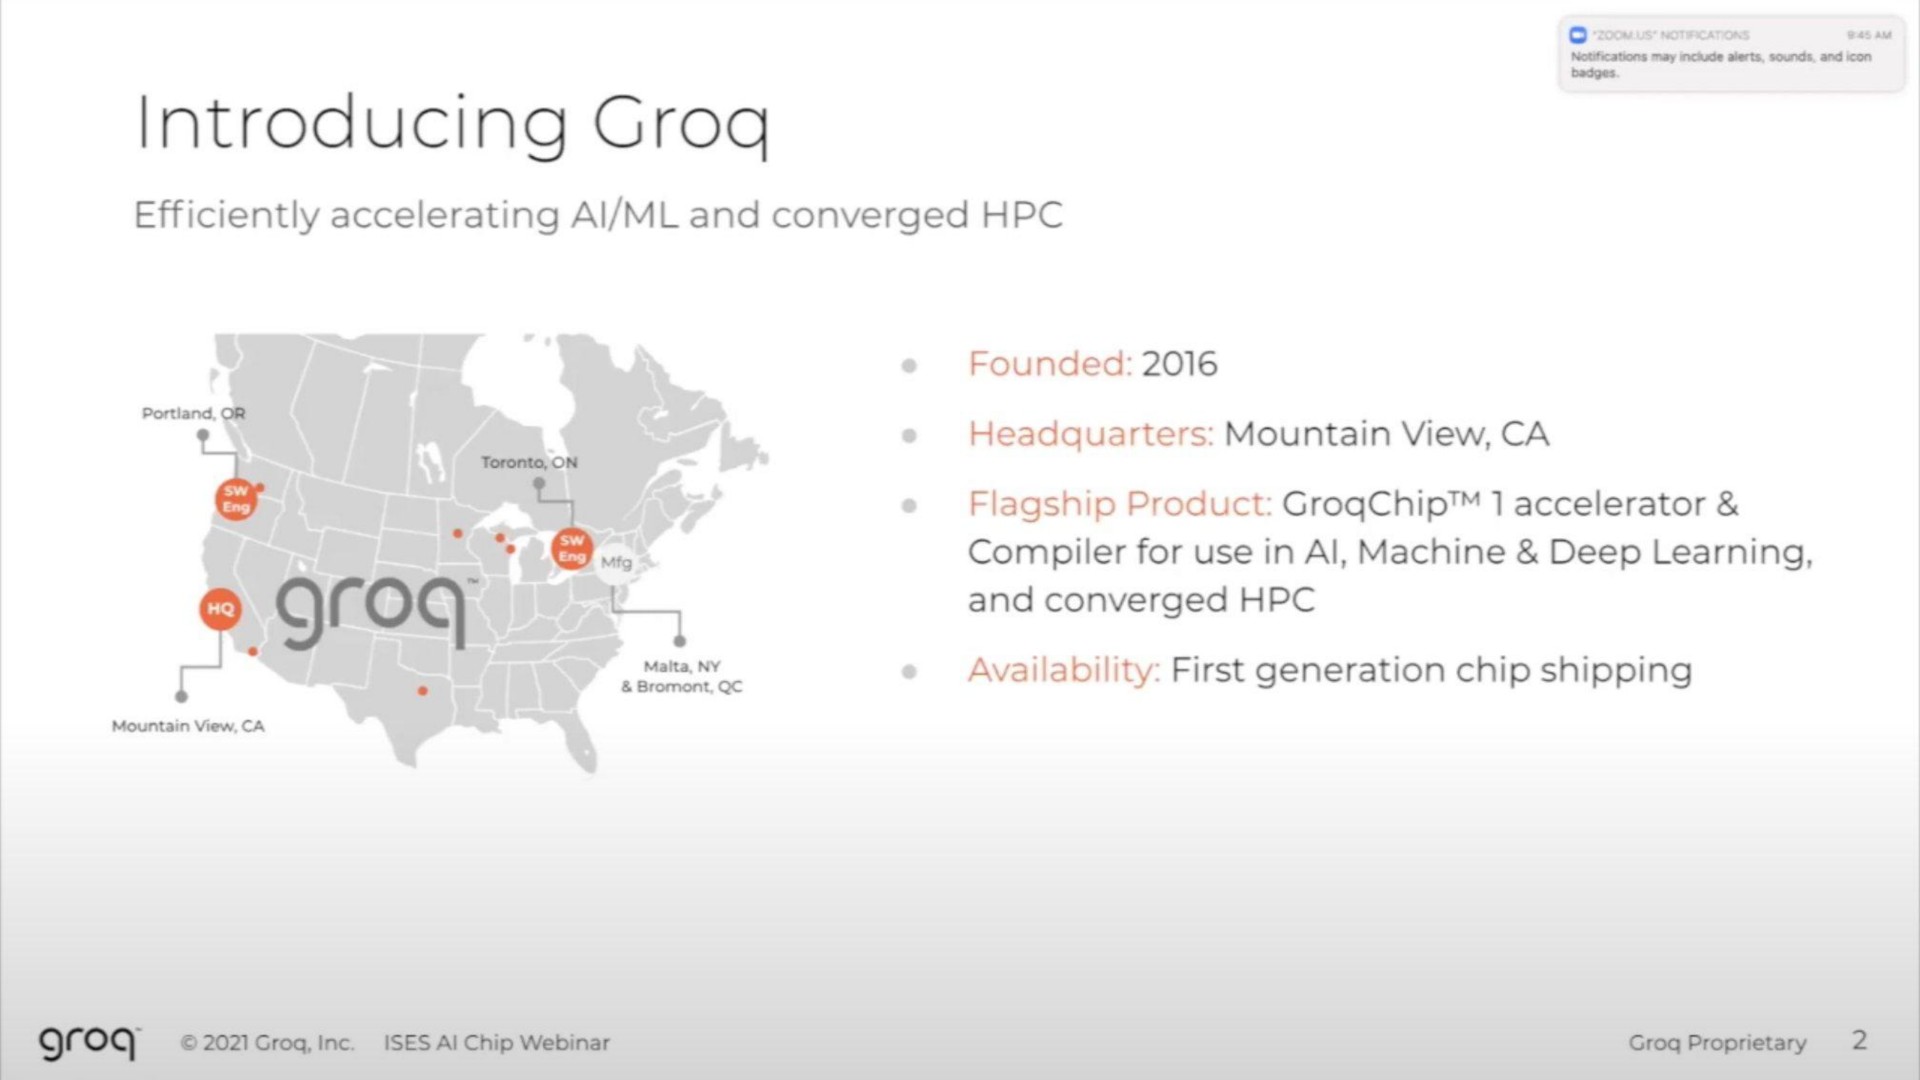 introducing grog efficiently accelerating and converged founded headquarters mountain view flagship product accelerator compiler for use in machine deep learning and converged availability first generation chip shipping | Groq